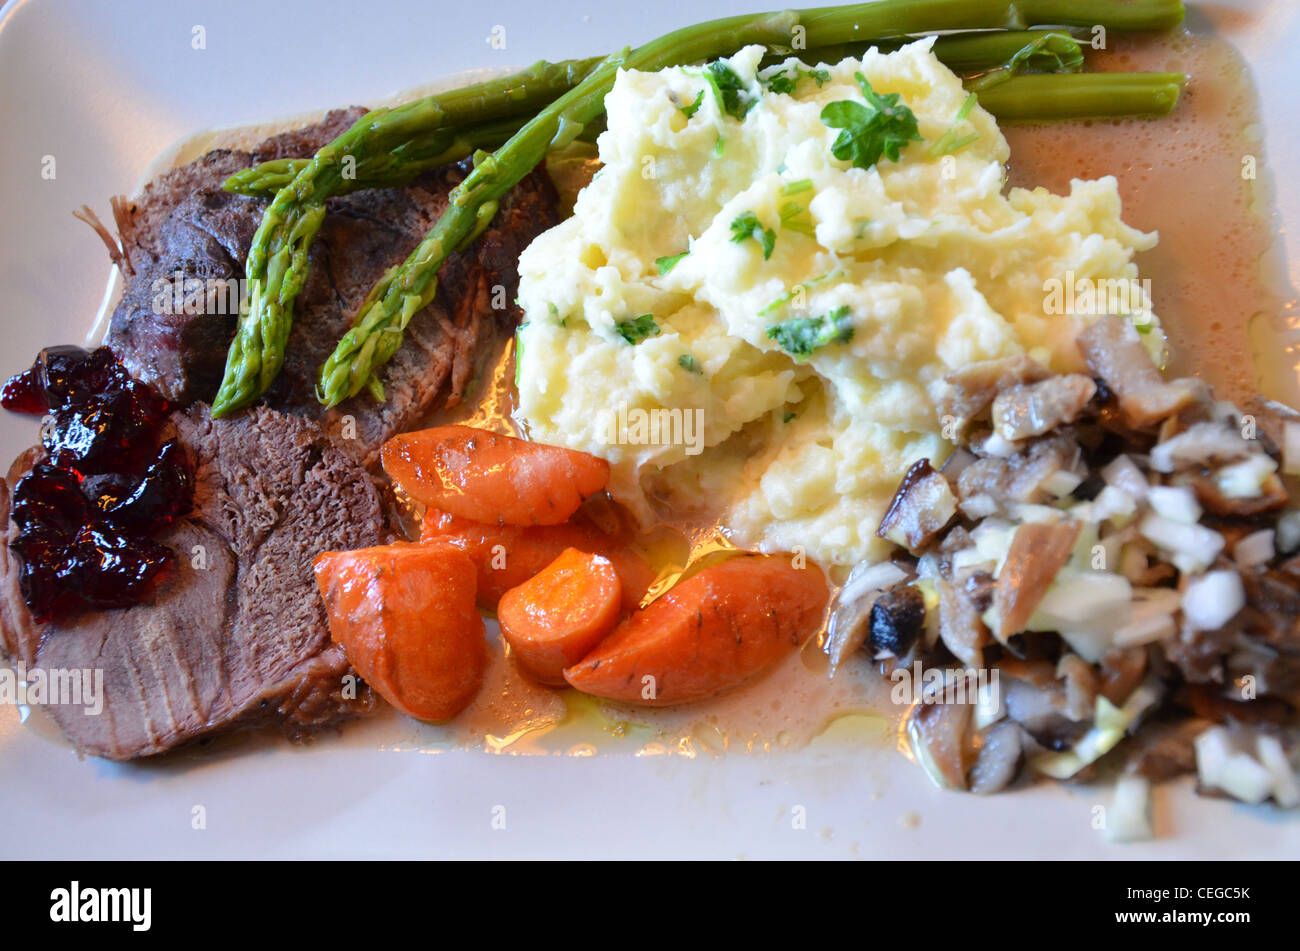 Dish with meat of wild boar and vegetables Stock Photo